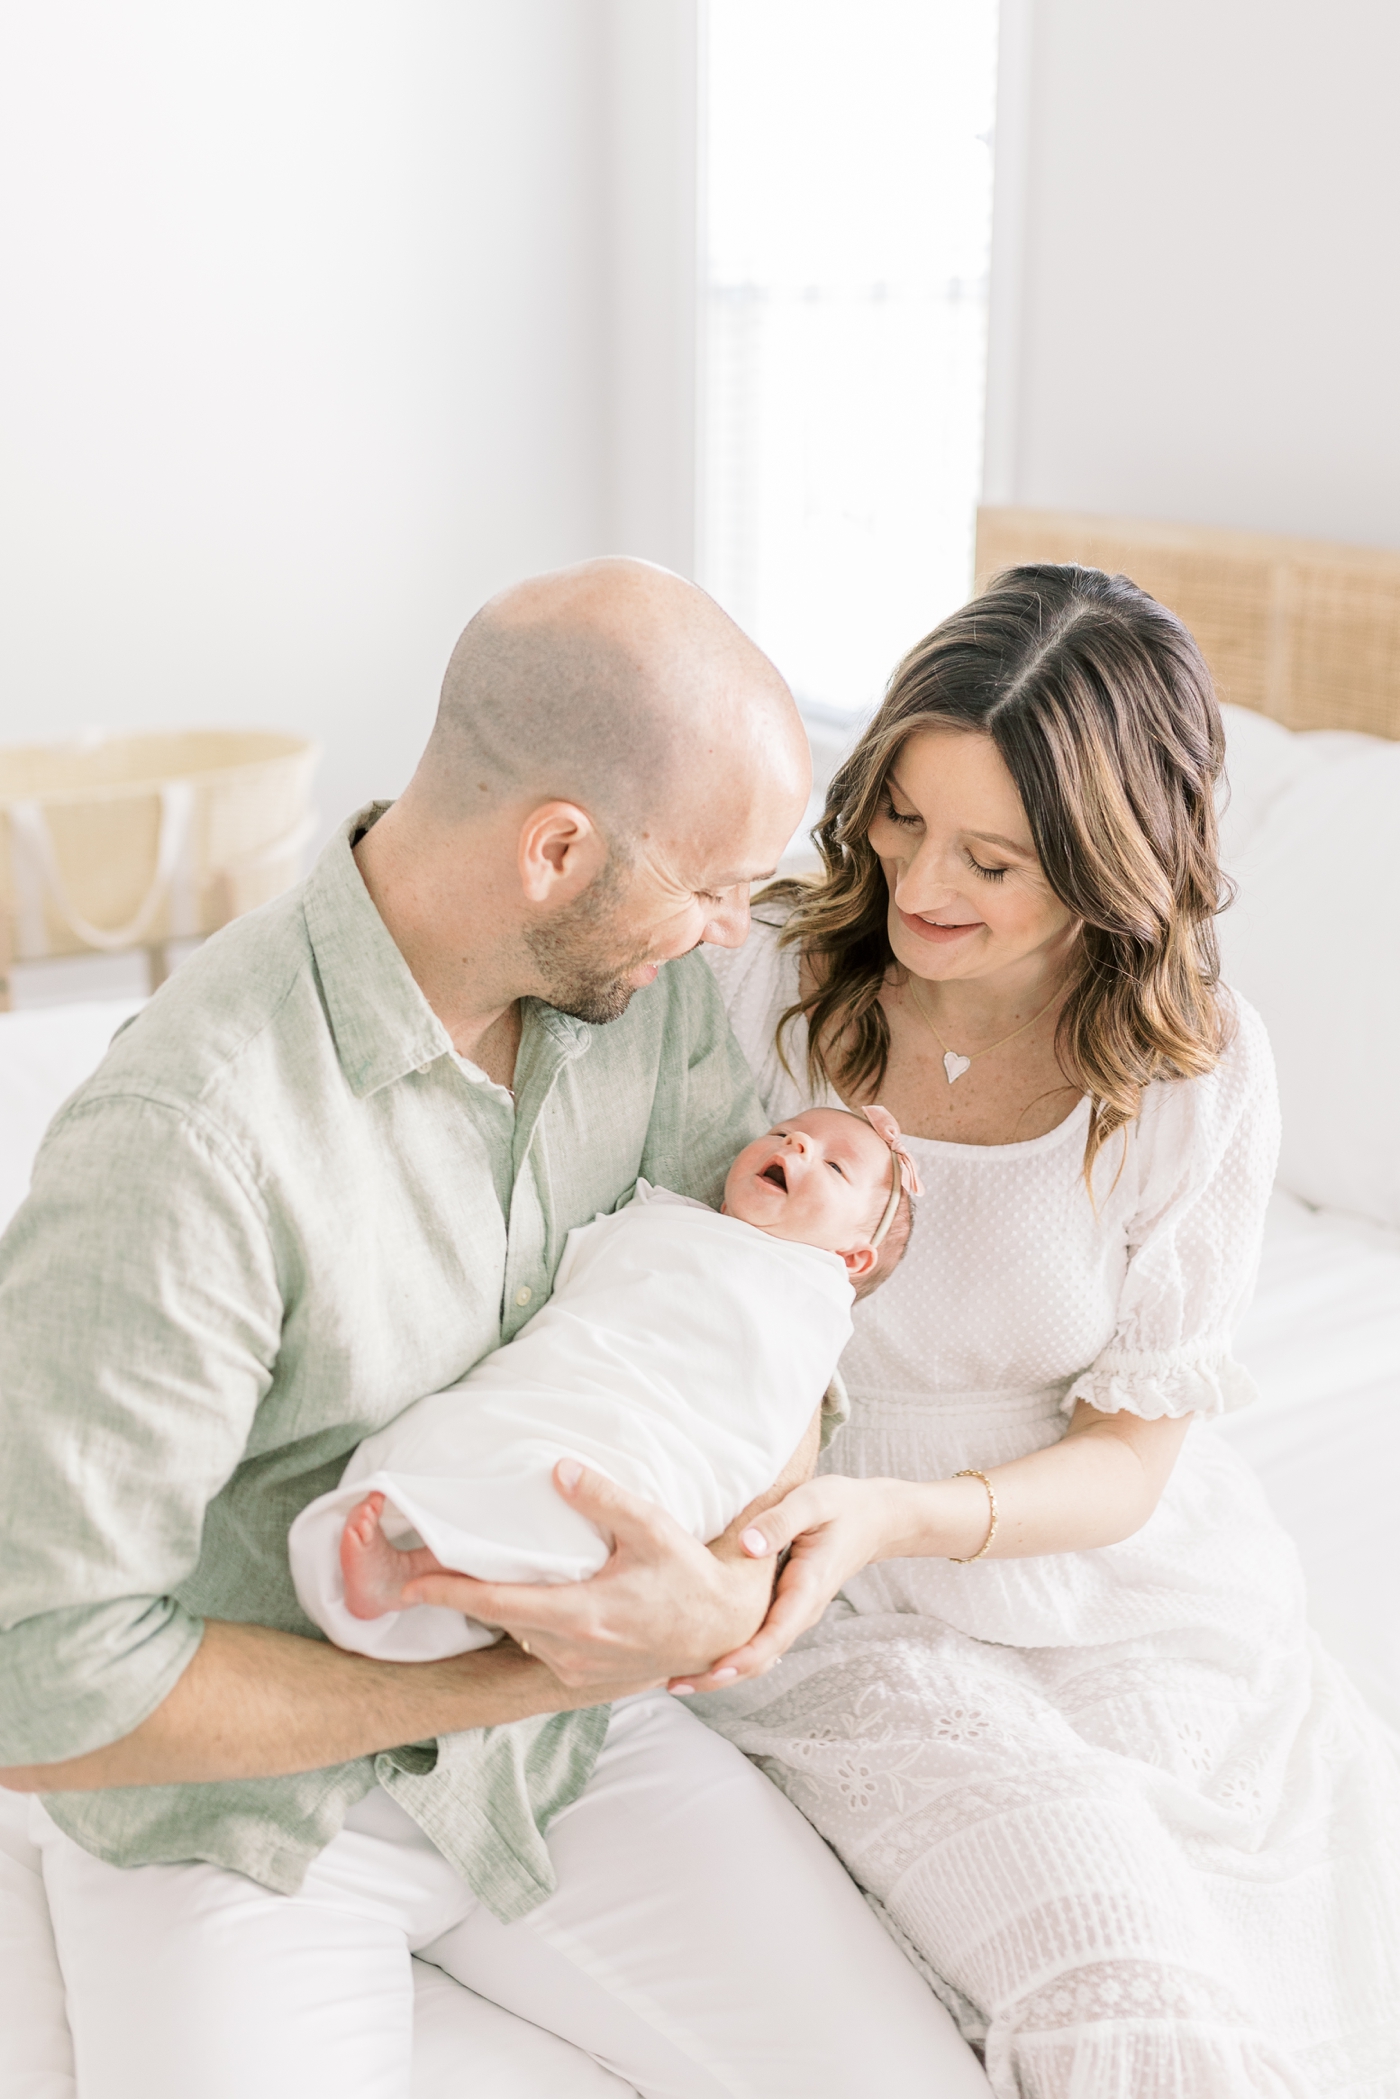 Dad and mom holding their new baby during their lifestyle newborn session | Photo by Caitlyn Motycka Photography